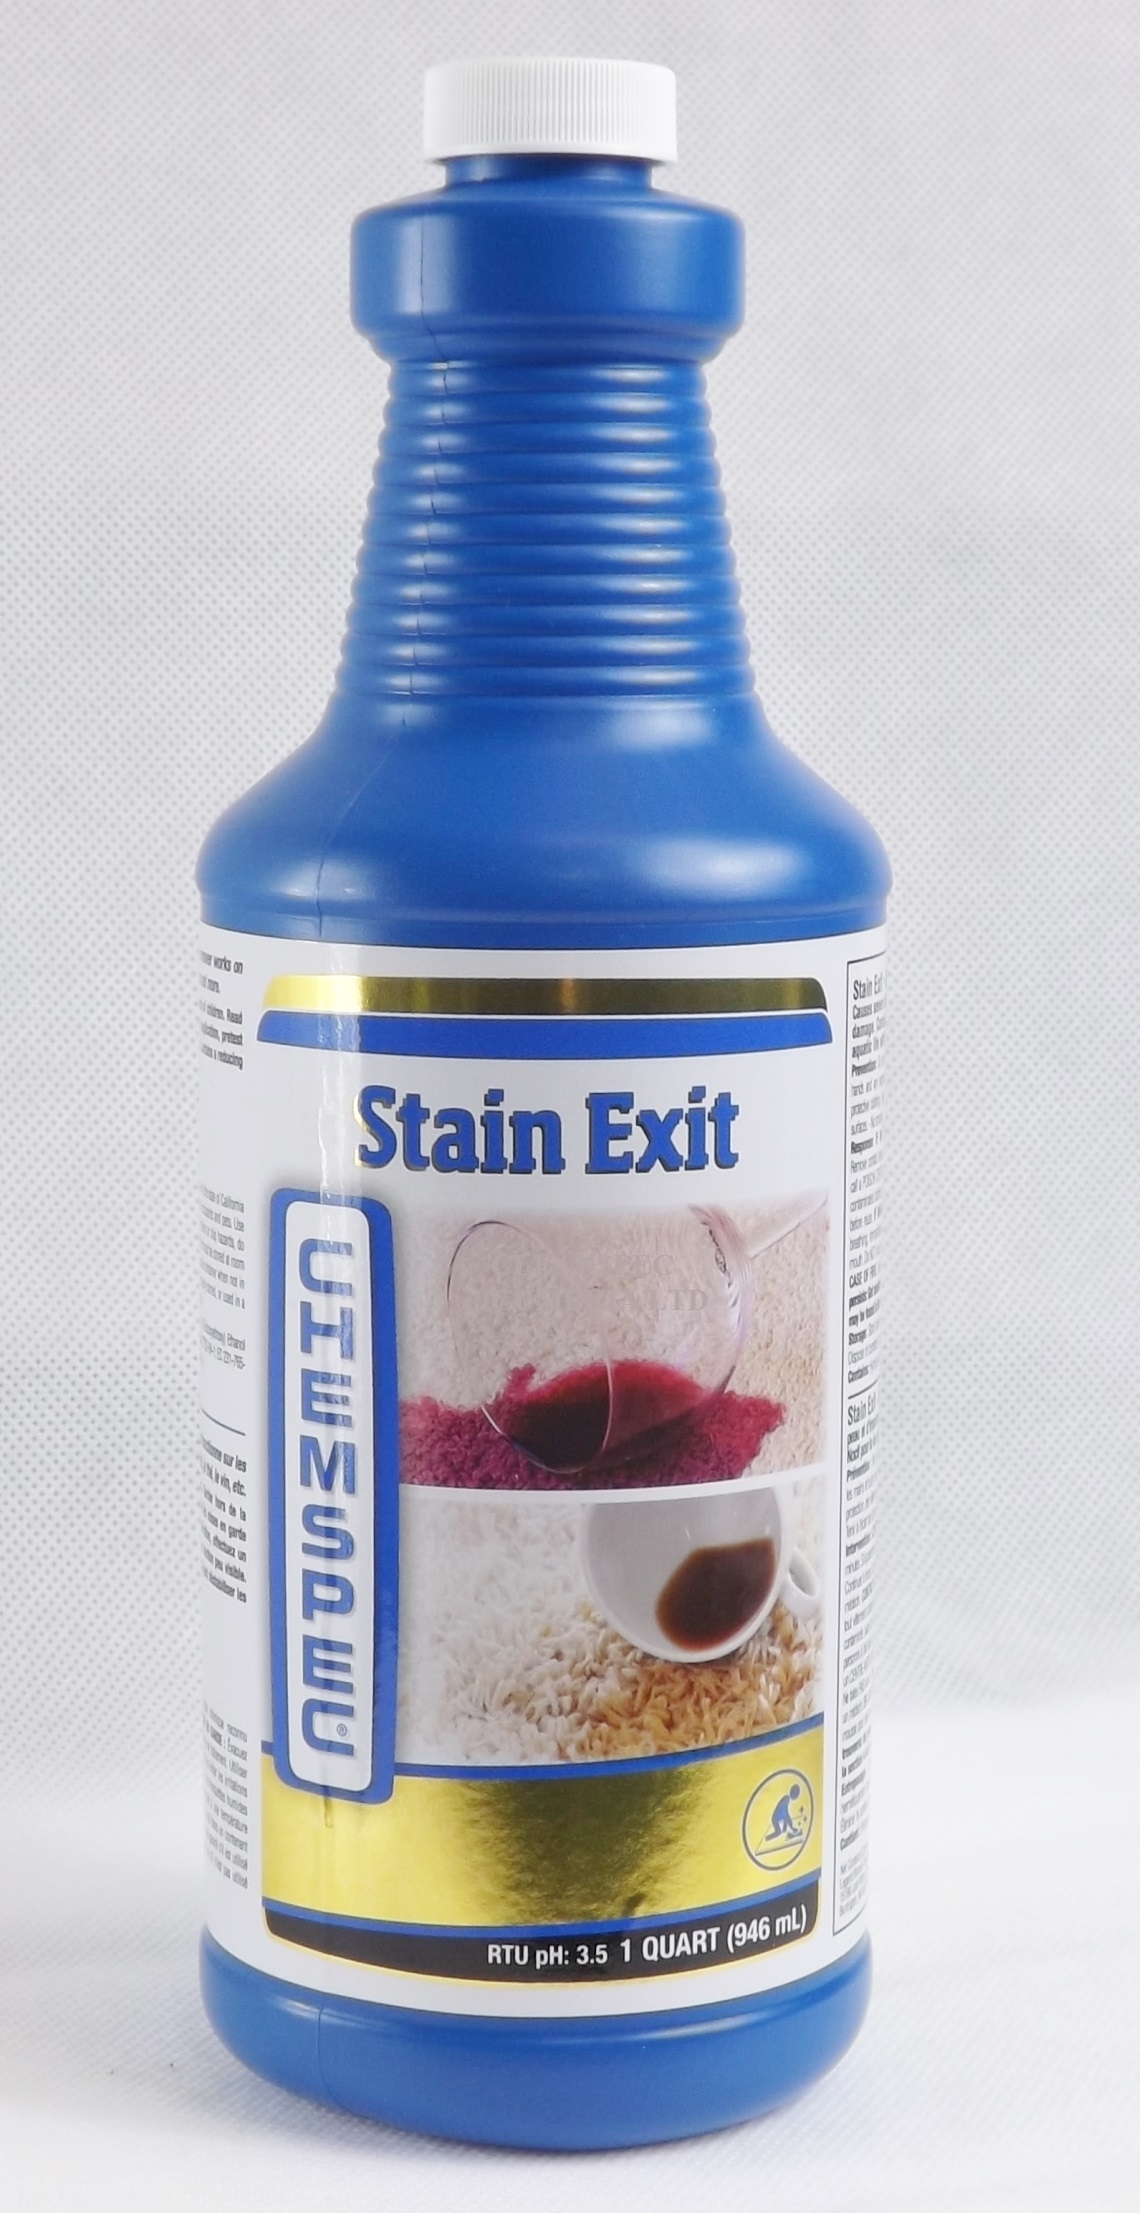 Stain Exit